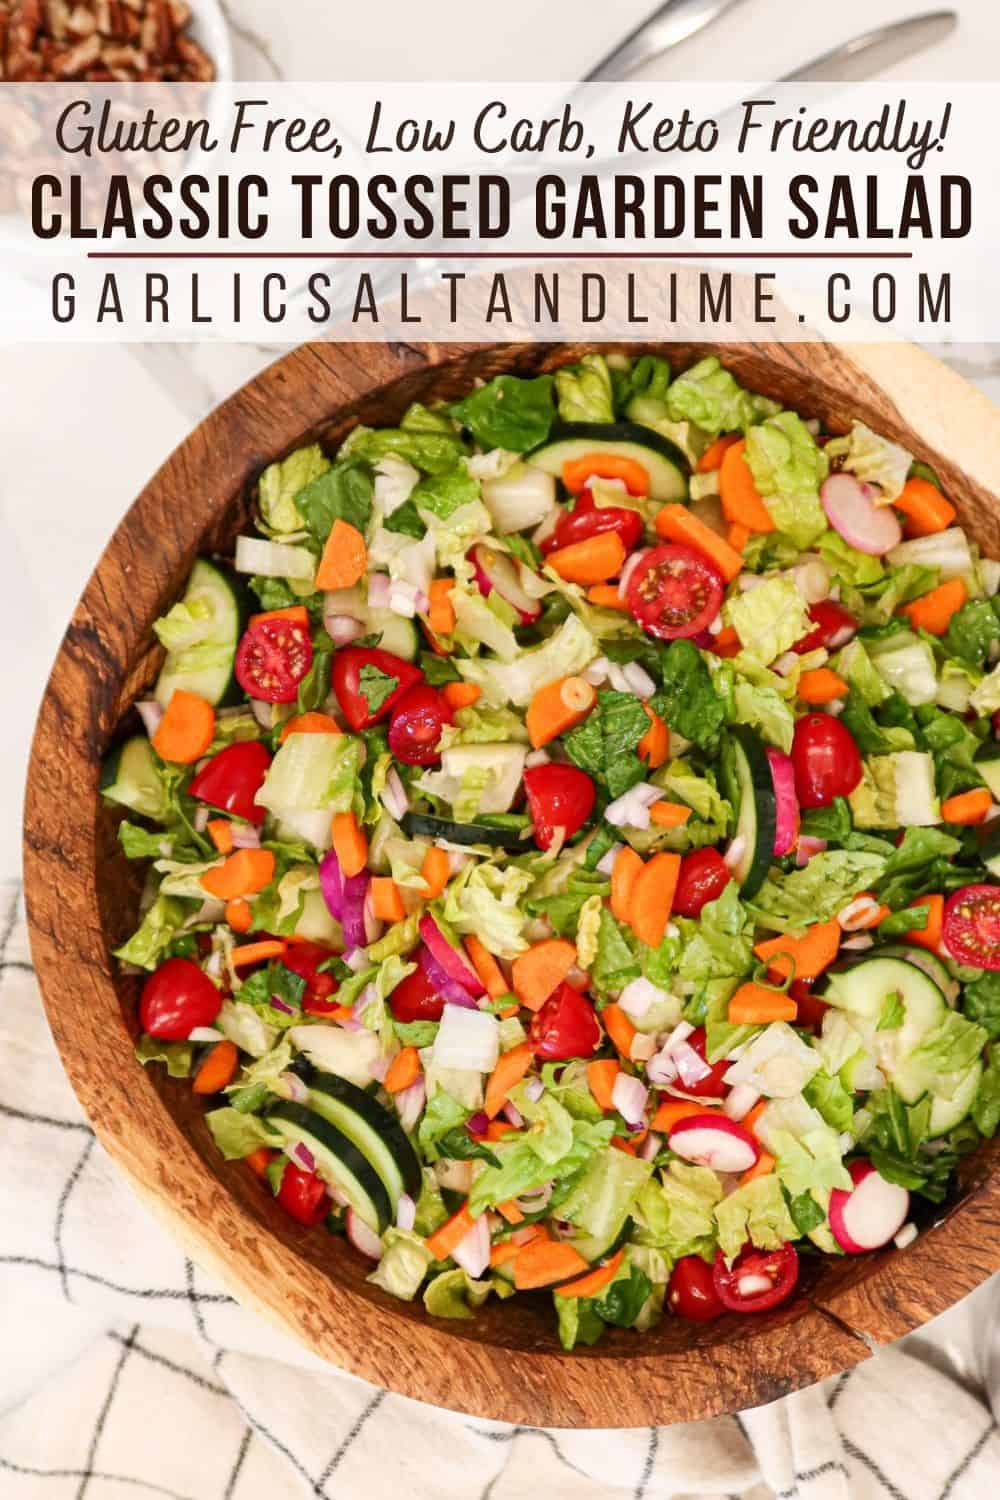 Garden salad in a wooden serving bowl with text overlay for Pinterest.